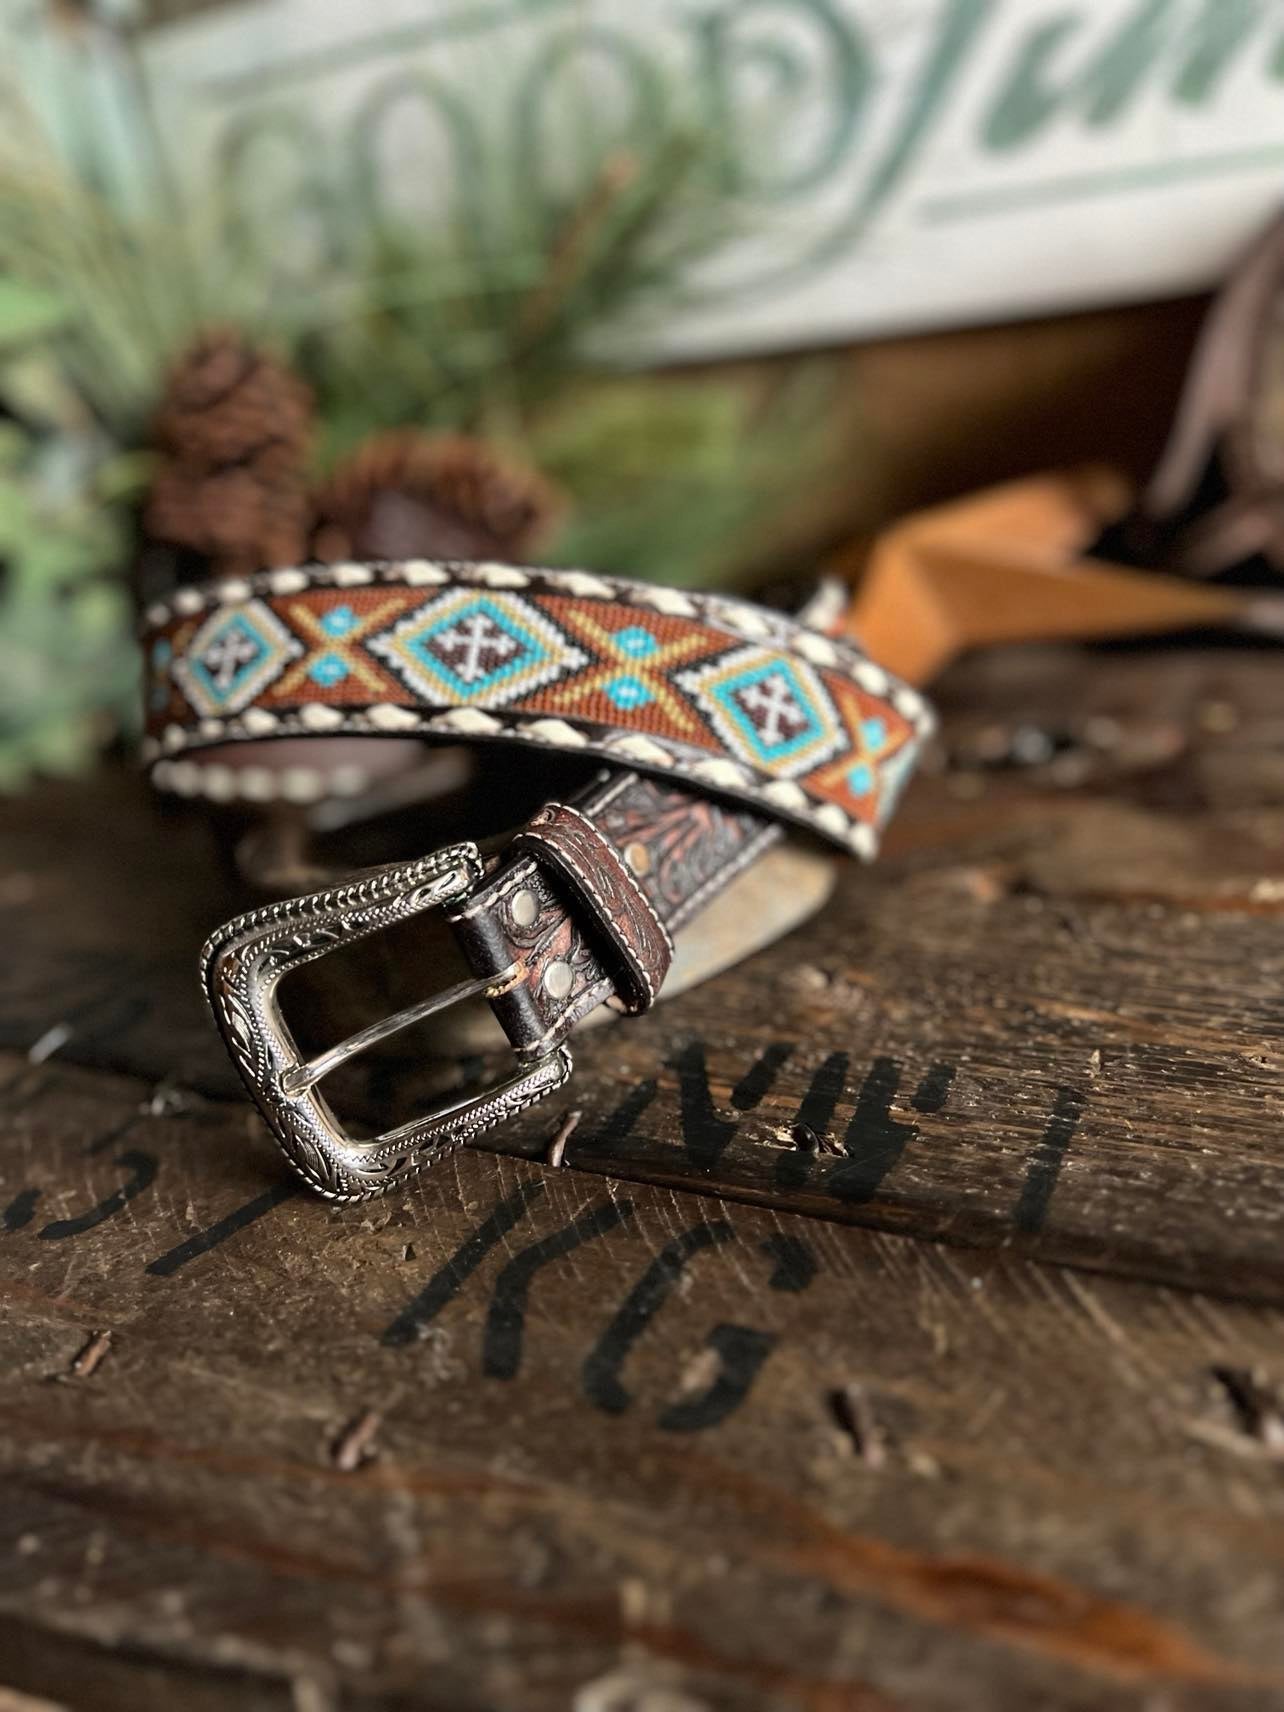 Nacona Floral Tooled and Beaded Belt with White Buck Stitch-Women's Belts-M & F Western Products-Lucky J Boots & More, Women's, Men's, & Kids Western Store Located in Carthage, MO